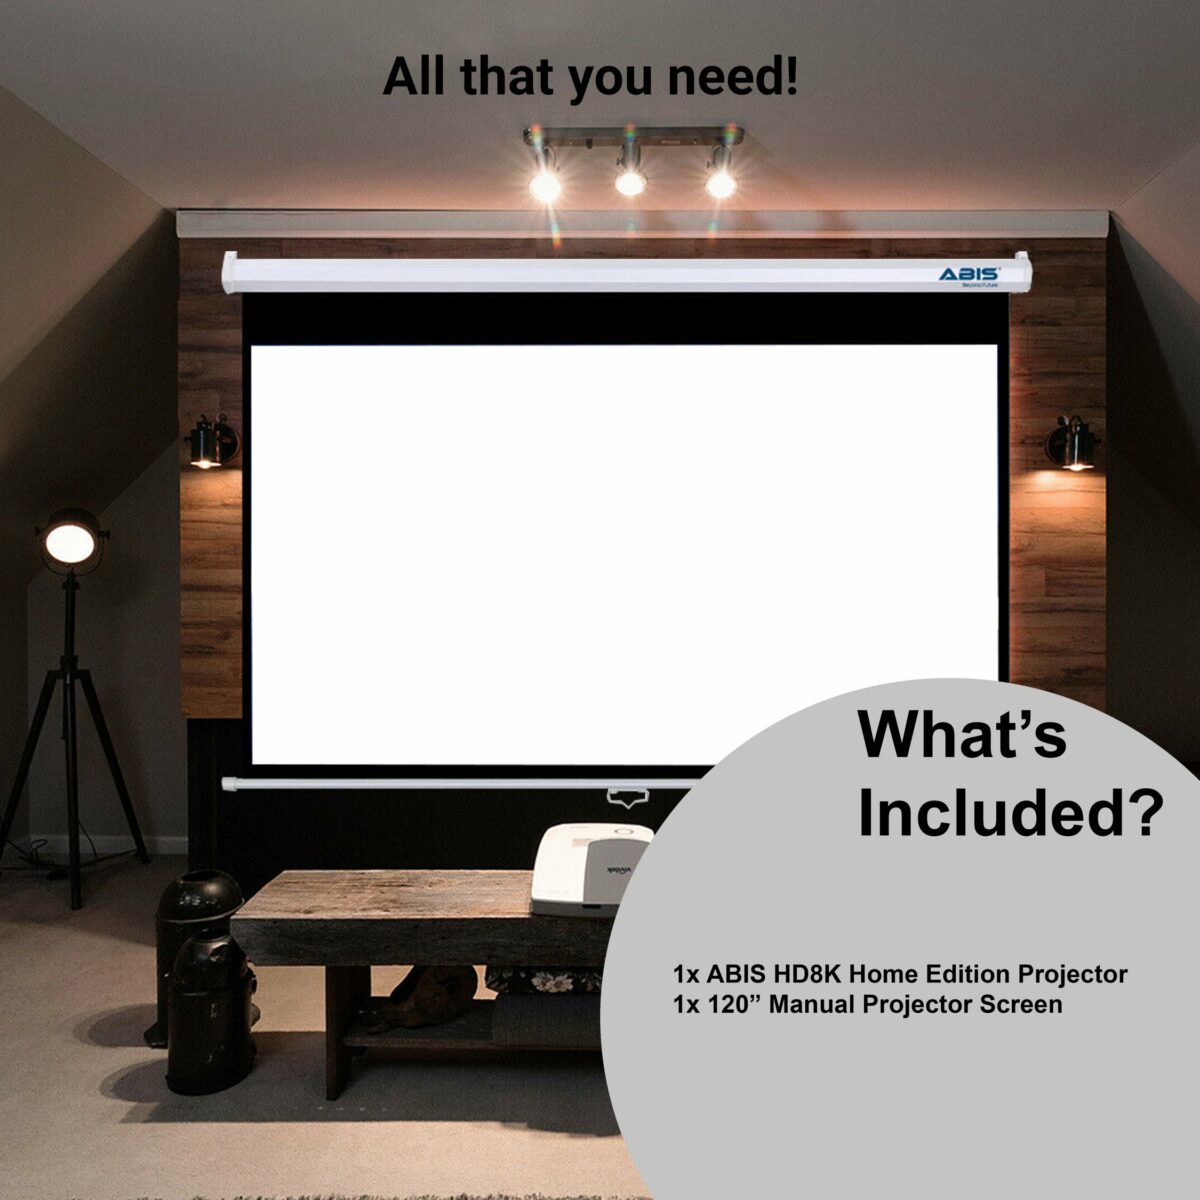 120" Manual Projector Screen & Projector Bundle with Android TV Stick for Home - ABIS